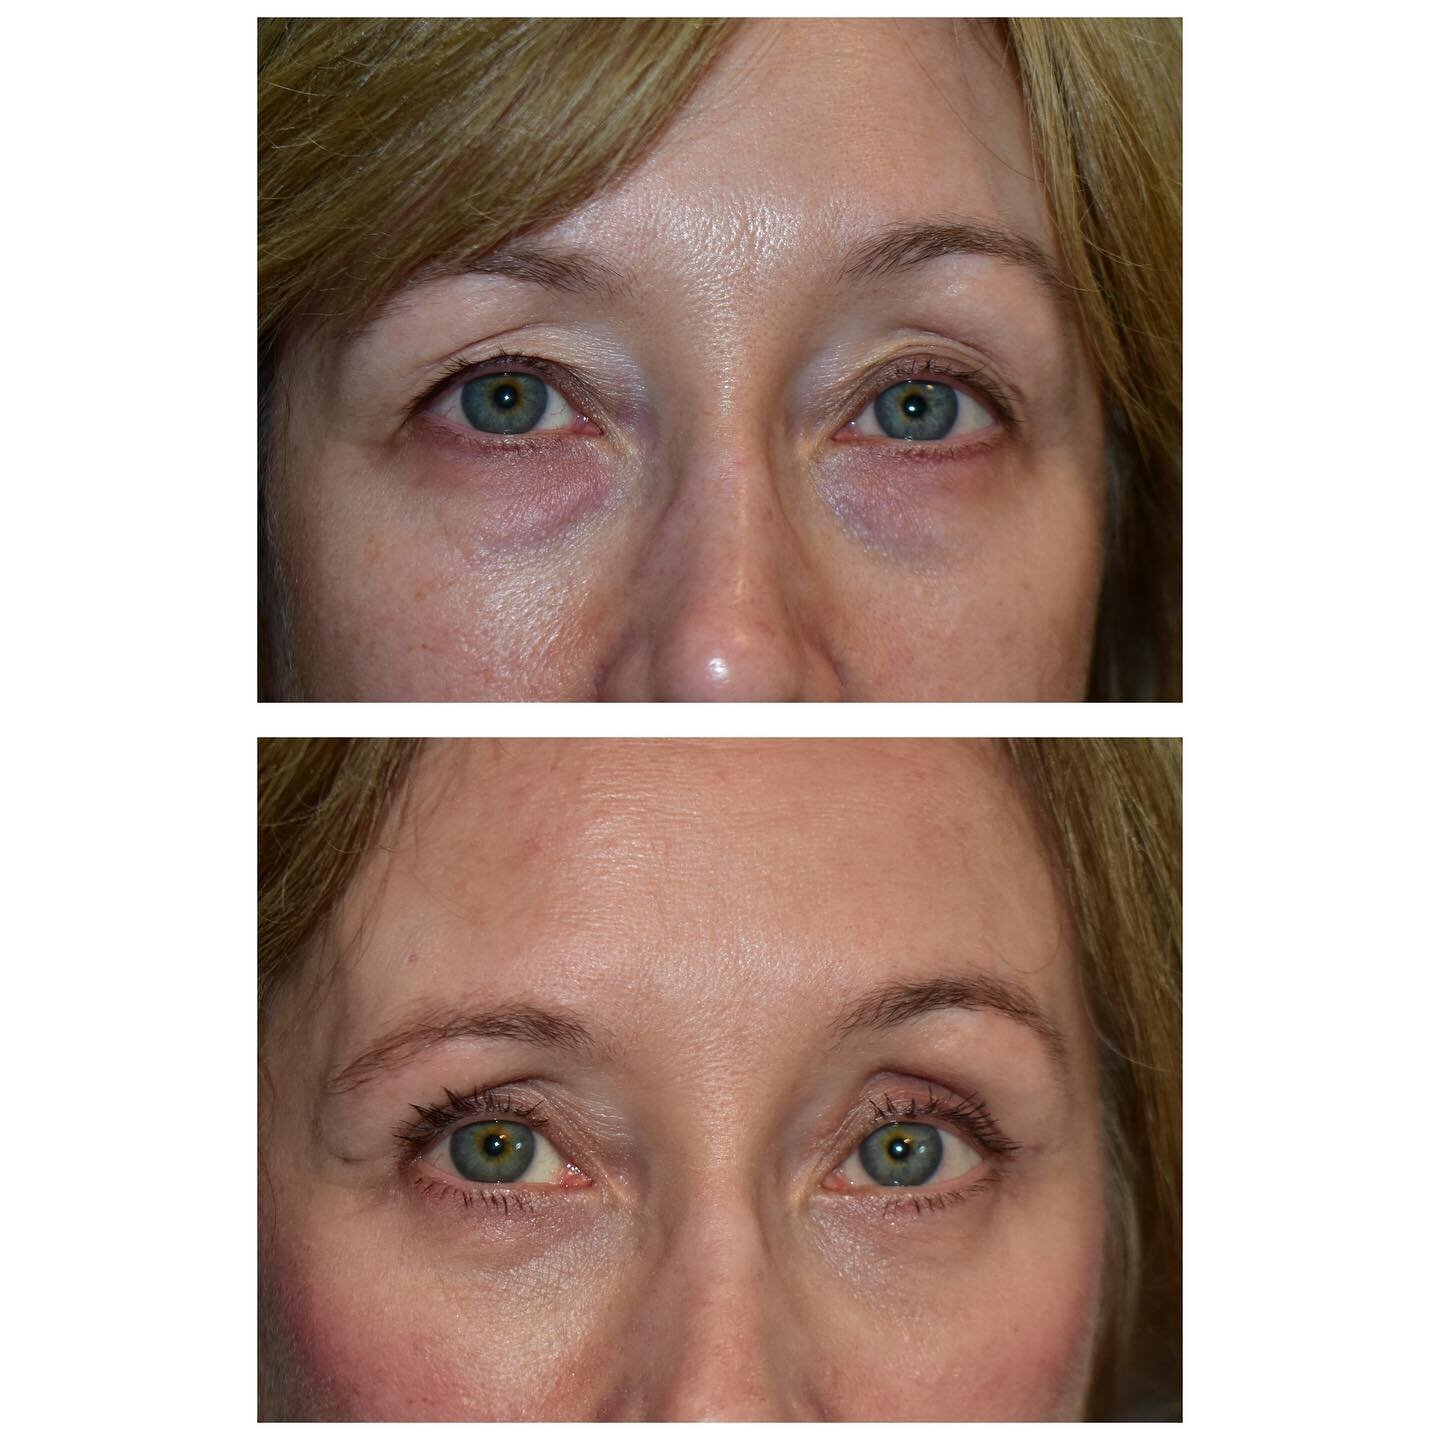 Upper and Lower Blepharoplasty performed by Mr Carver.

These before and after photos show how eye surgery can give you more youthful look and confidence. 

Blepharoplasty is performed under general anaesthetic with one night stay in hospital.

If yo